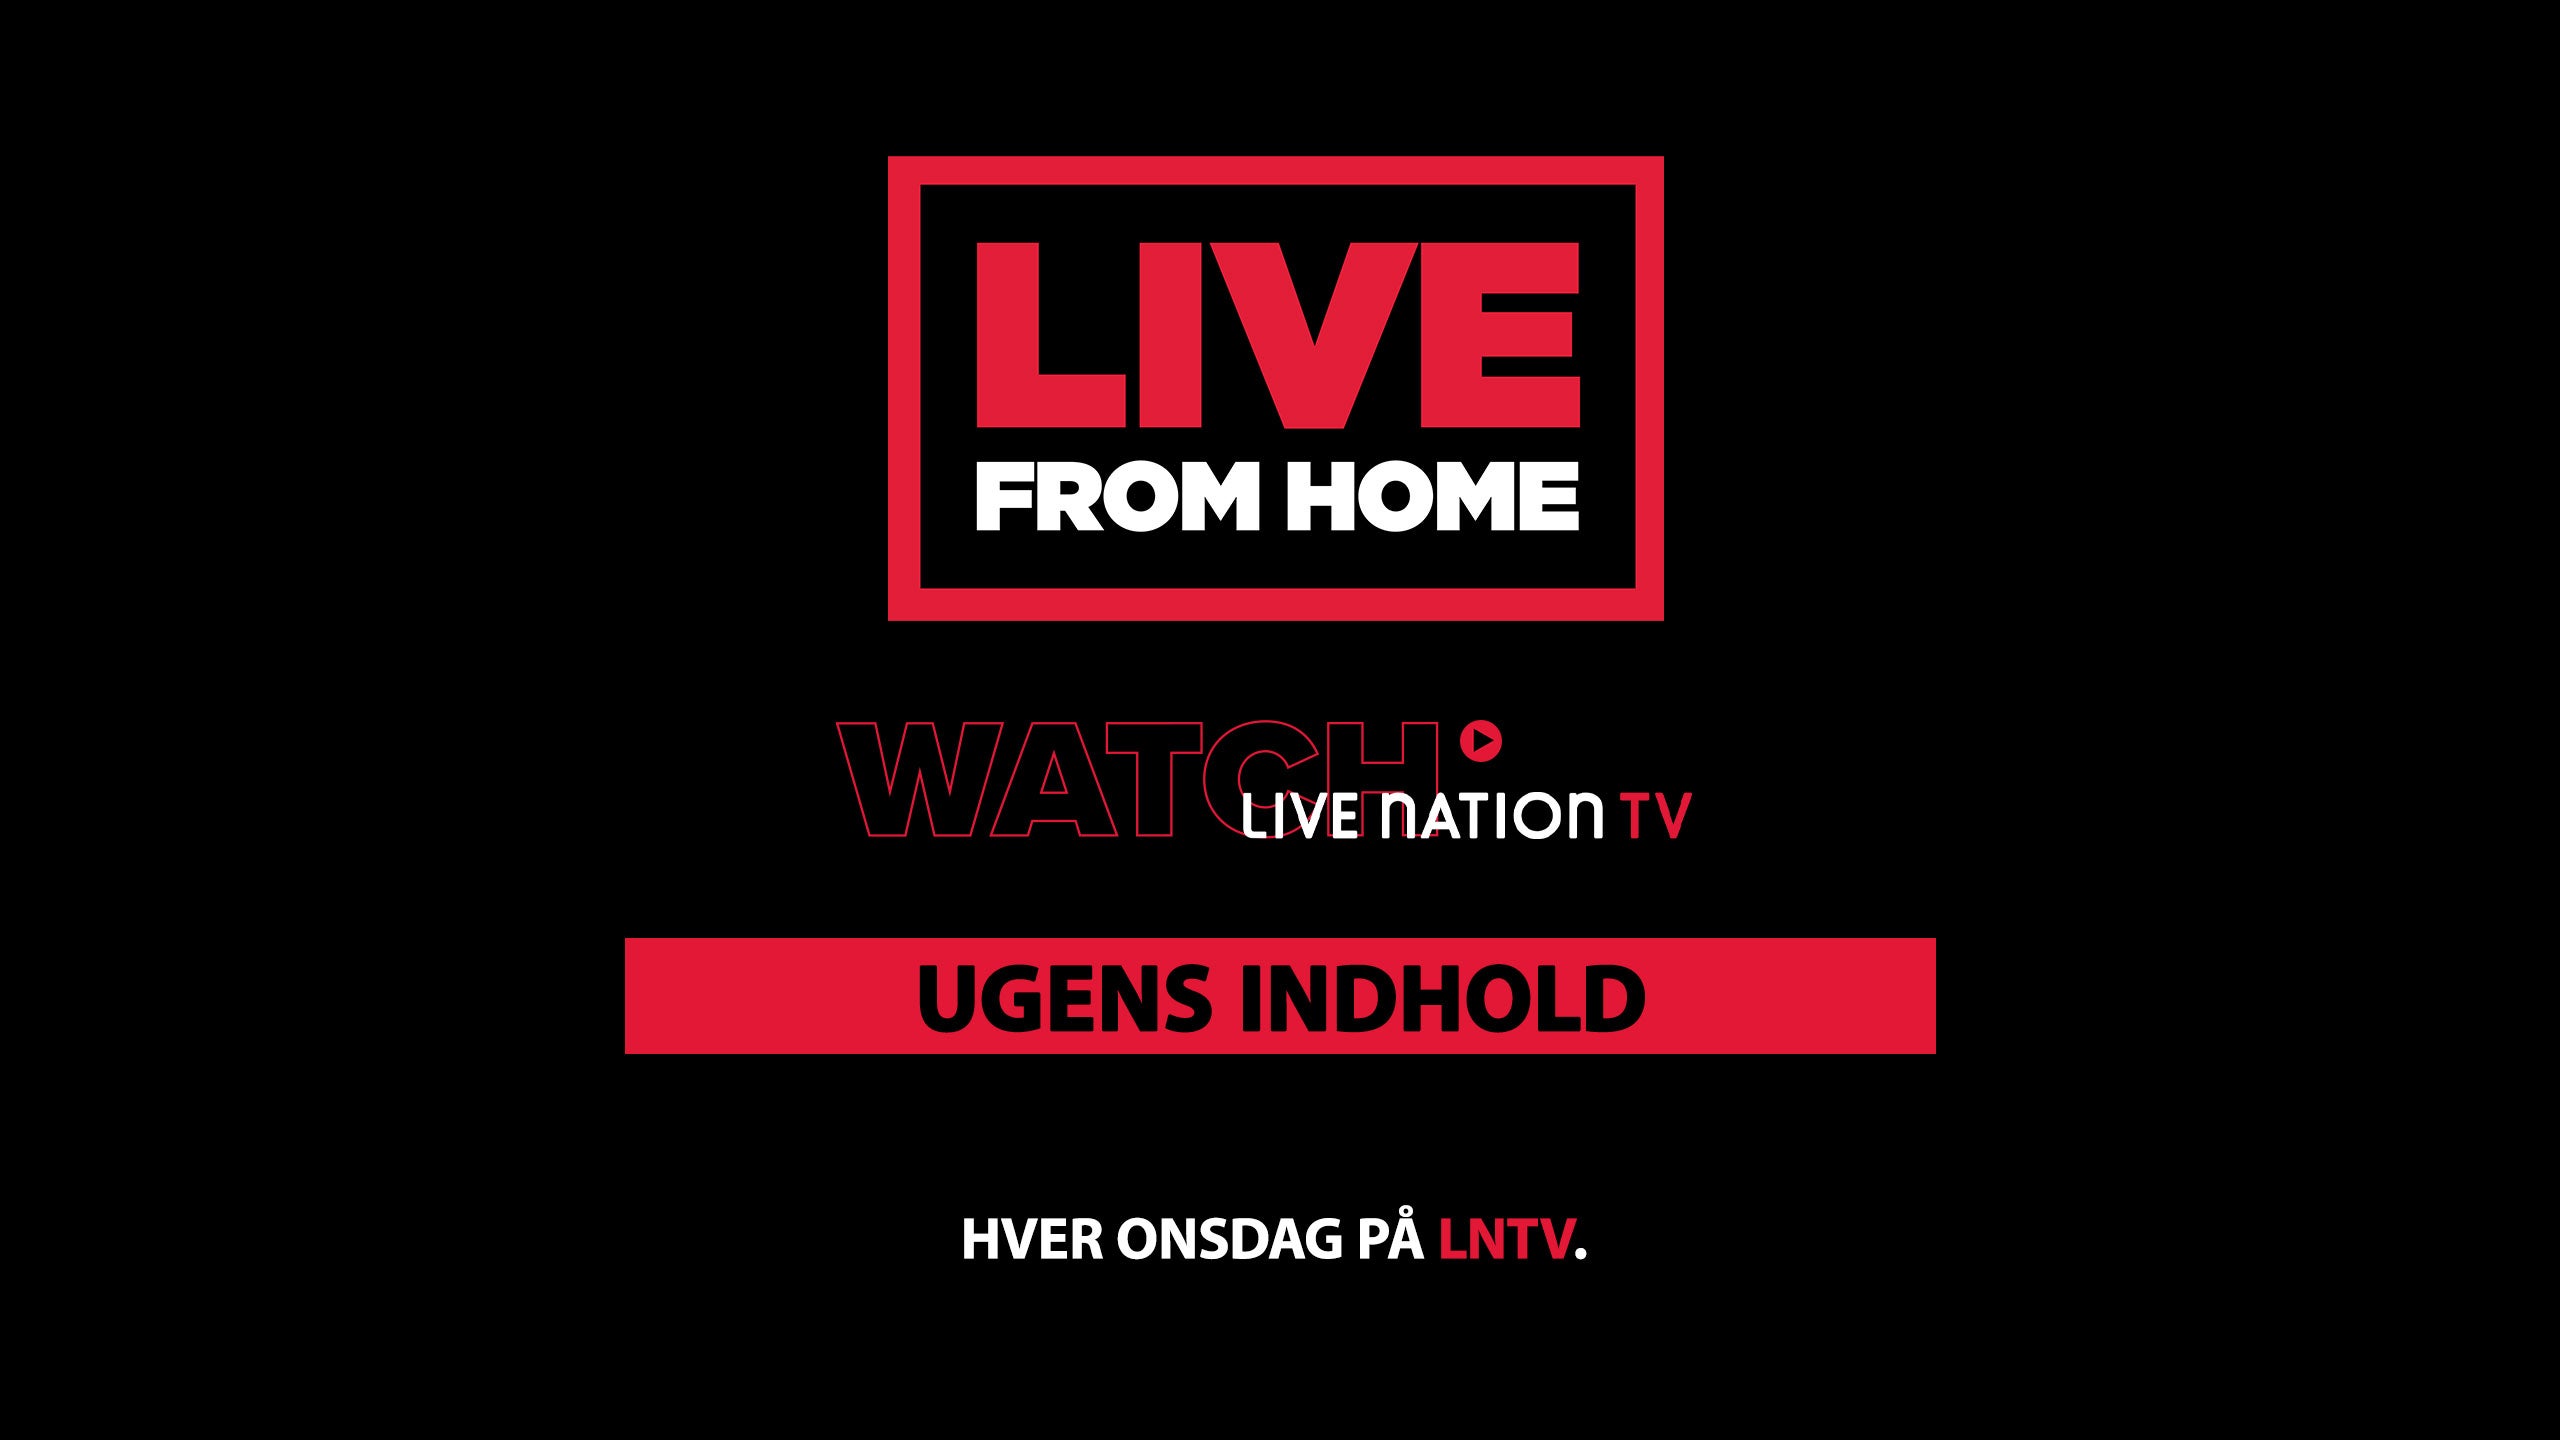 NYT: LNTV LIVE FRA HOME WEEKLY CONTENT SERIES